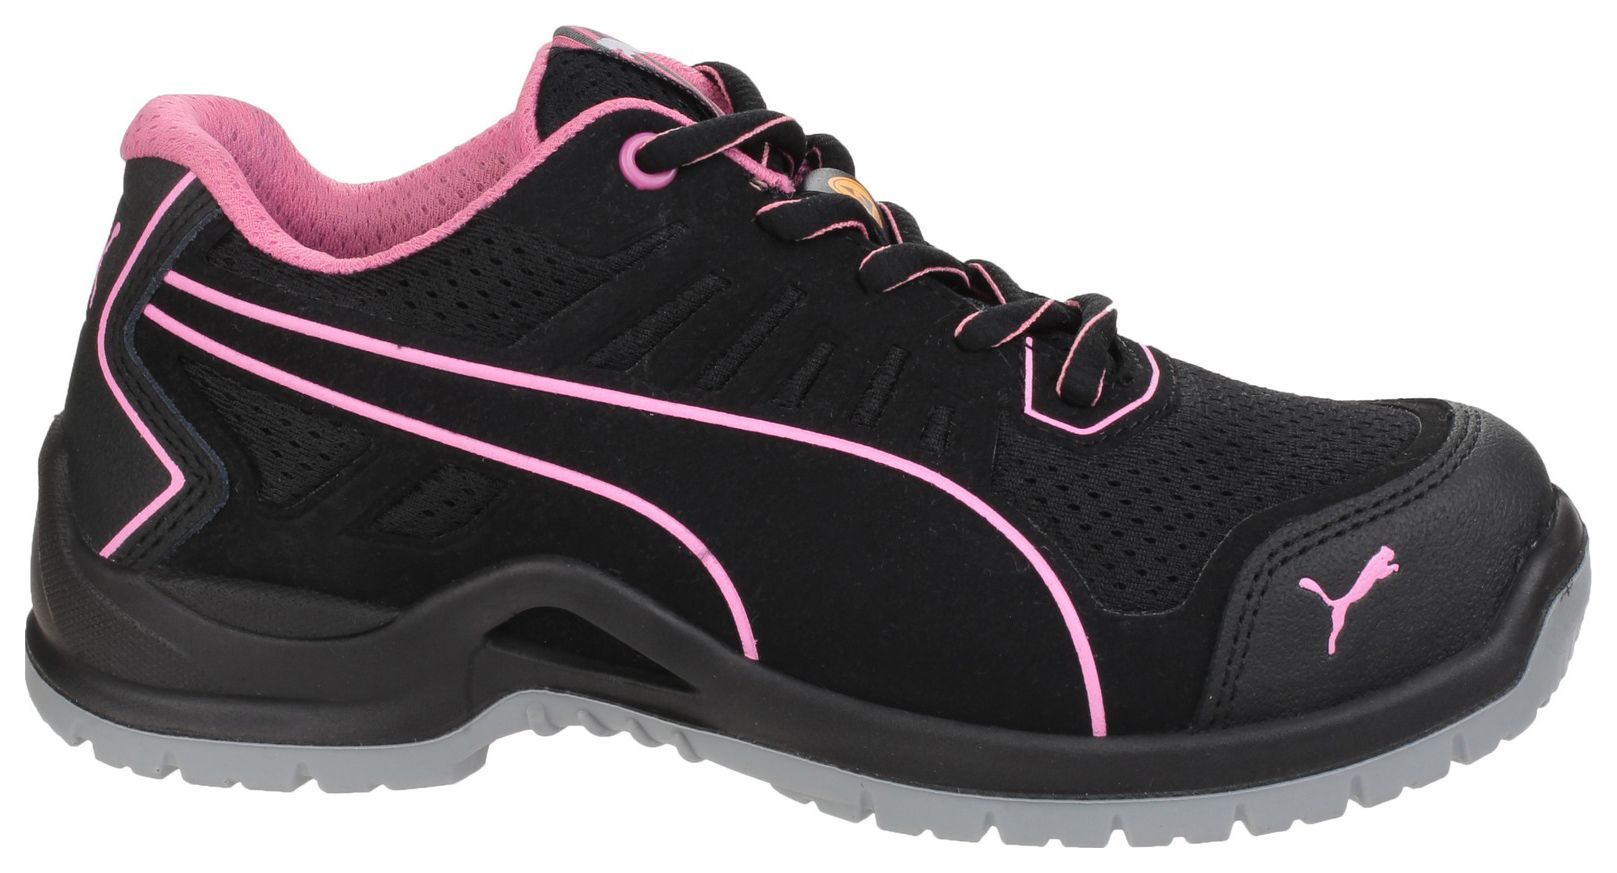 Image of Puma Fuse Technic 644110 Womens Safety Trainers Black - Size 36